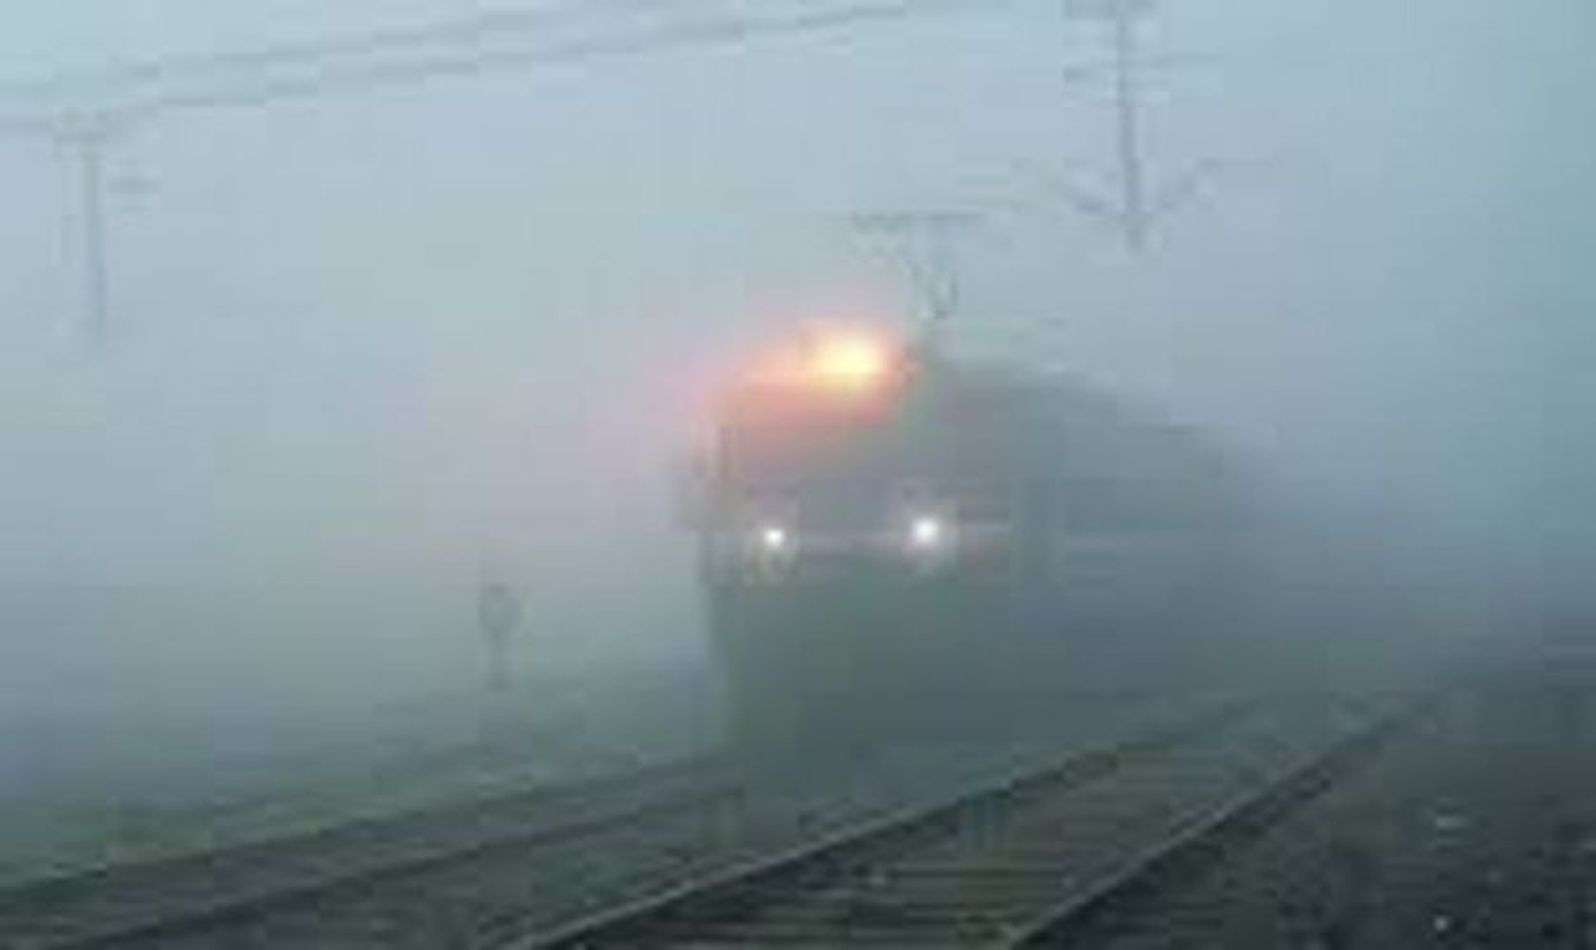 Special arrangements for safe operation of train in fog